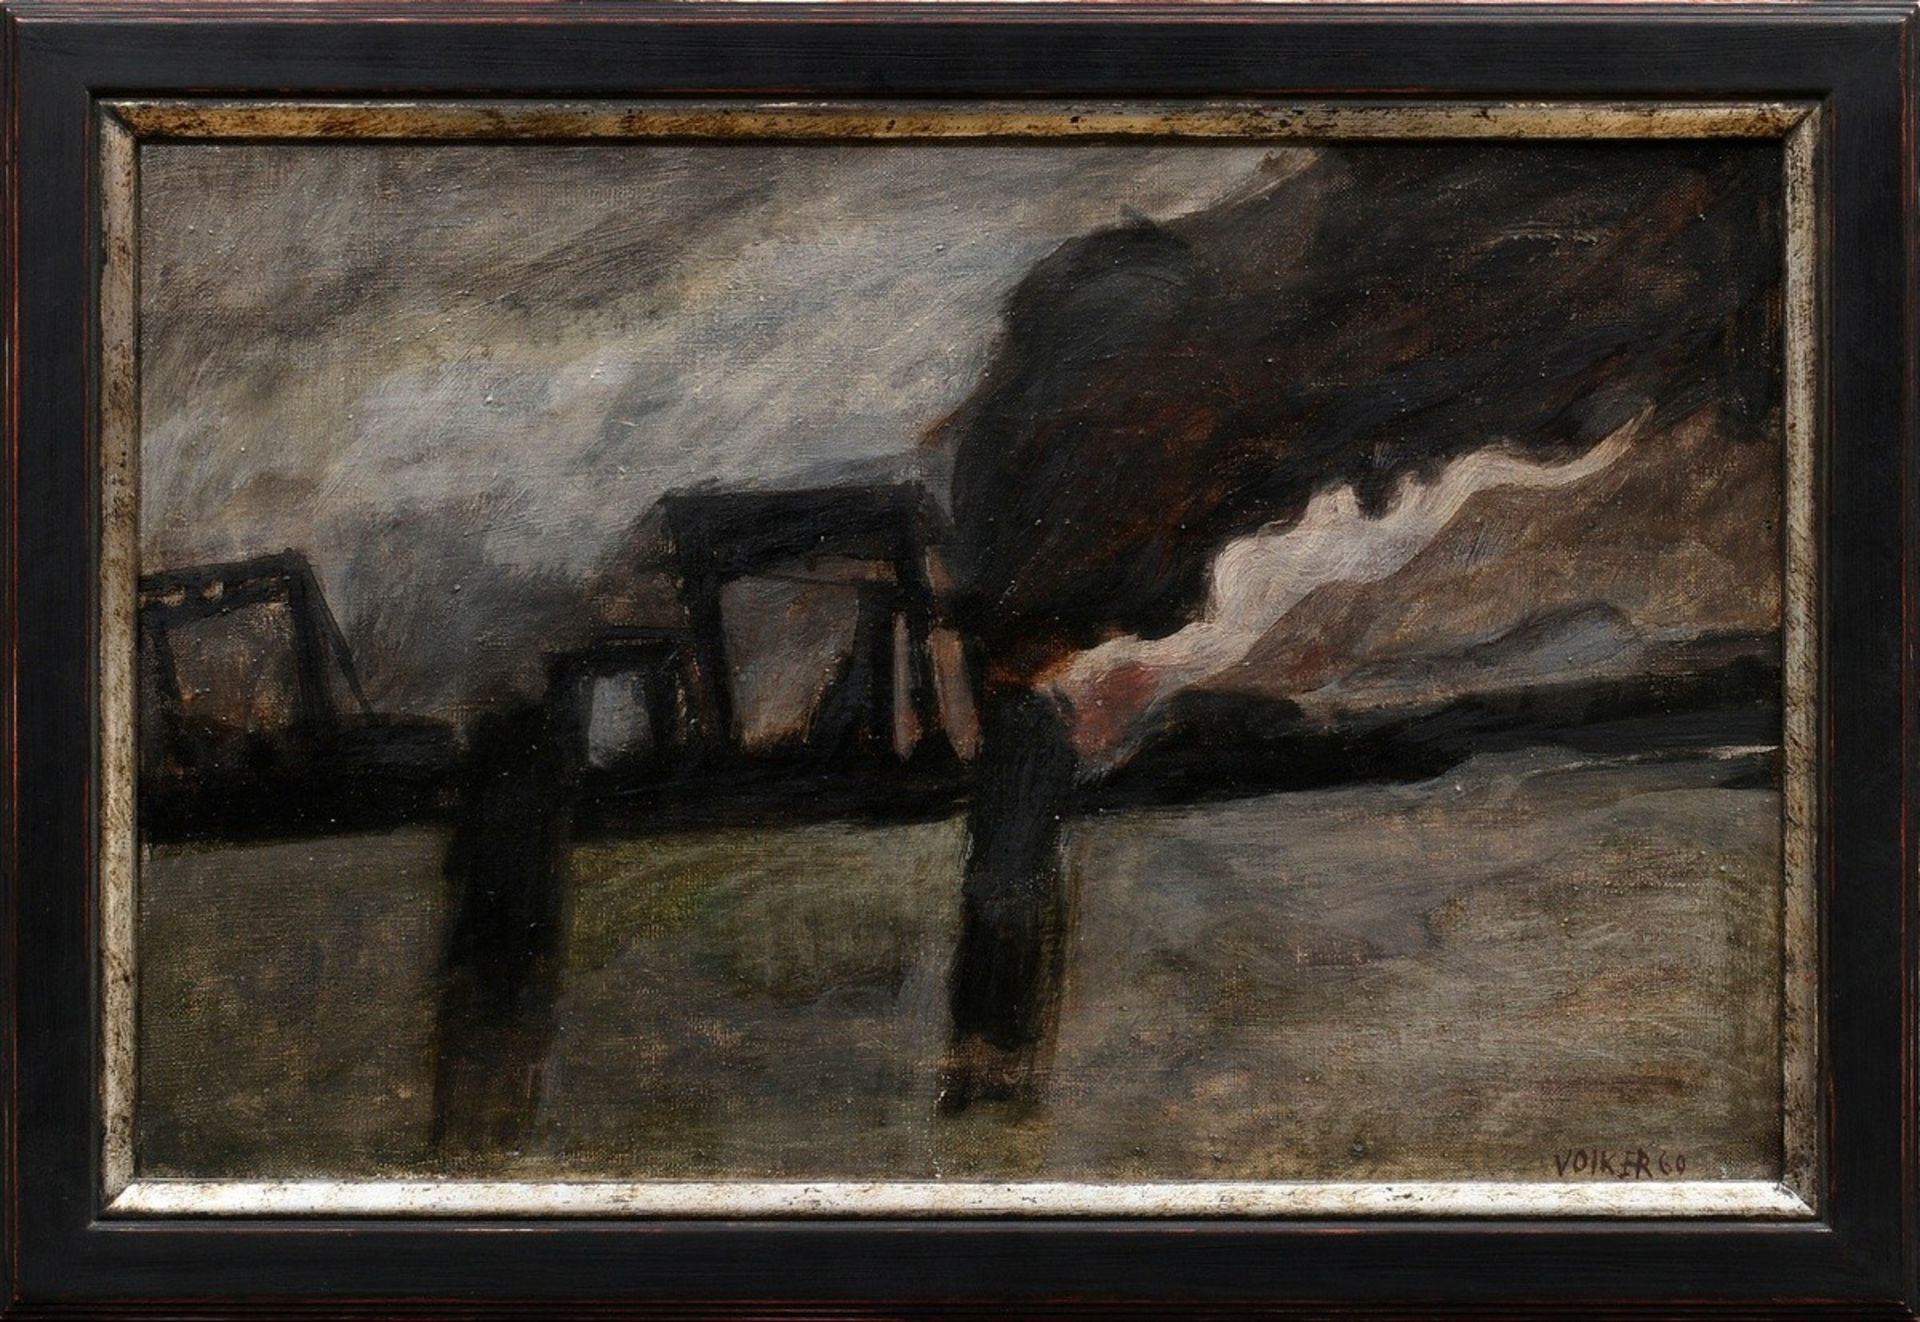 Meier, Volker (1932-1993) "Burning Shipyard" 1960, oil/canvas, lower right signed/dated, verso titl - Image 2 of 5